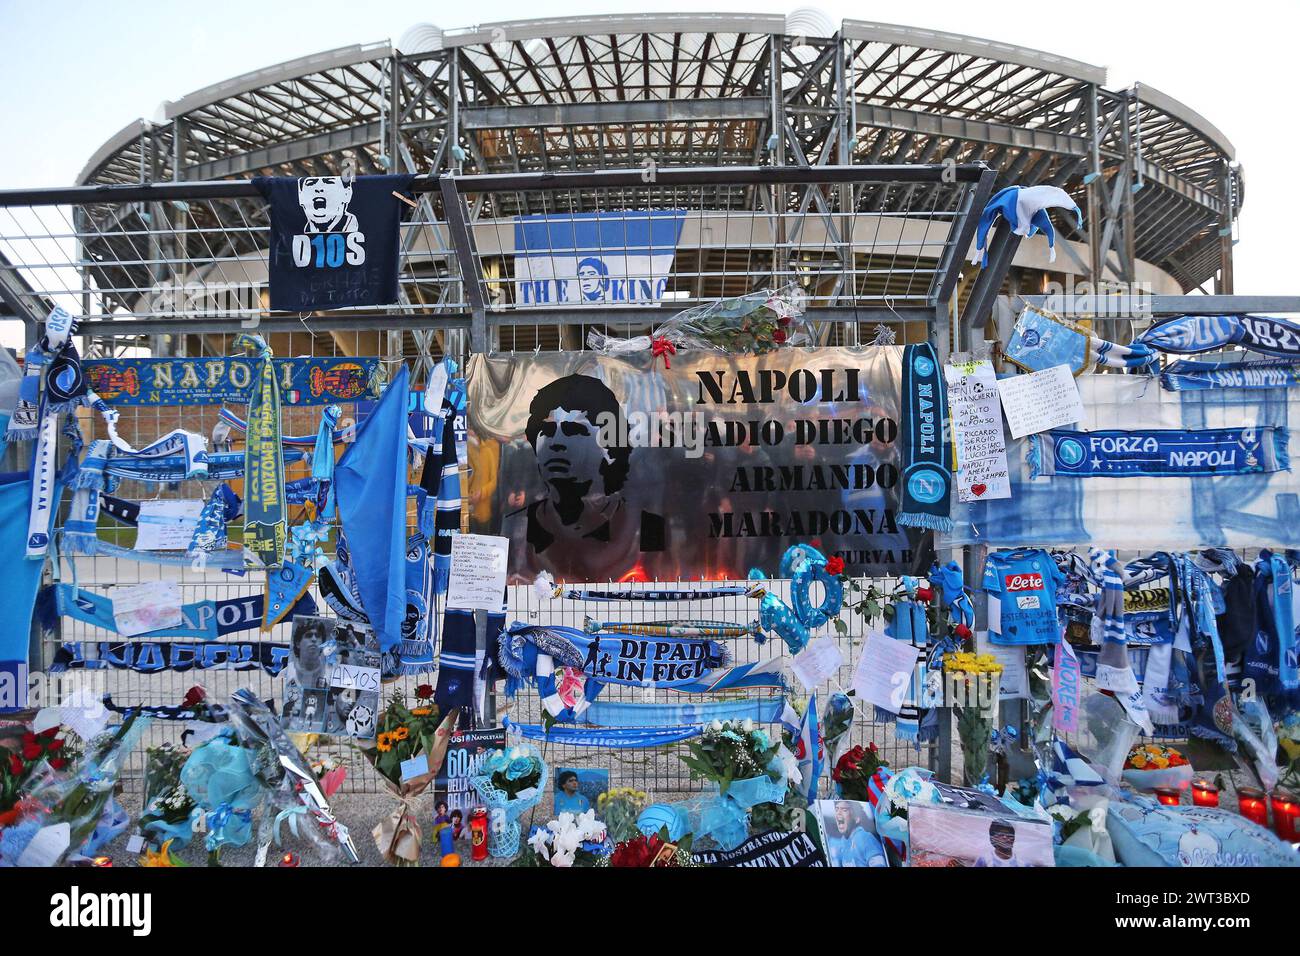 Memorabilia and tealights of Diego Armando Maradona, with a giant plaque that names the stadium to the champion, in front of the San Paolo stadium in Stock Photo